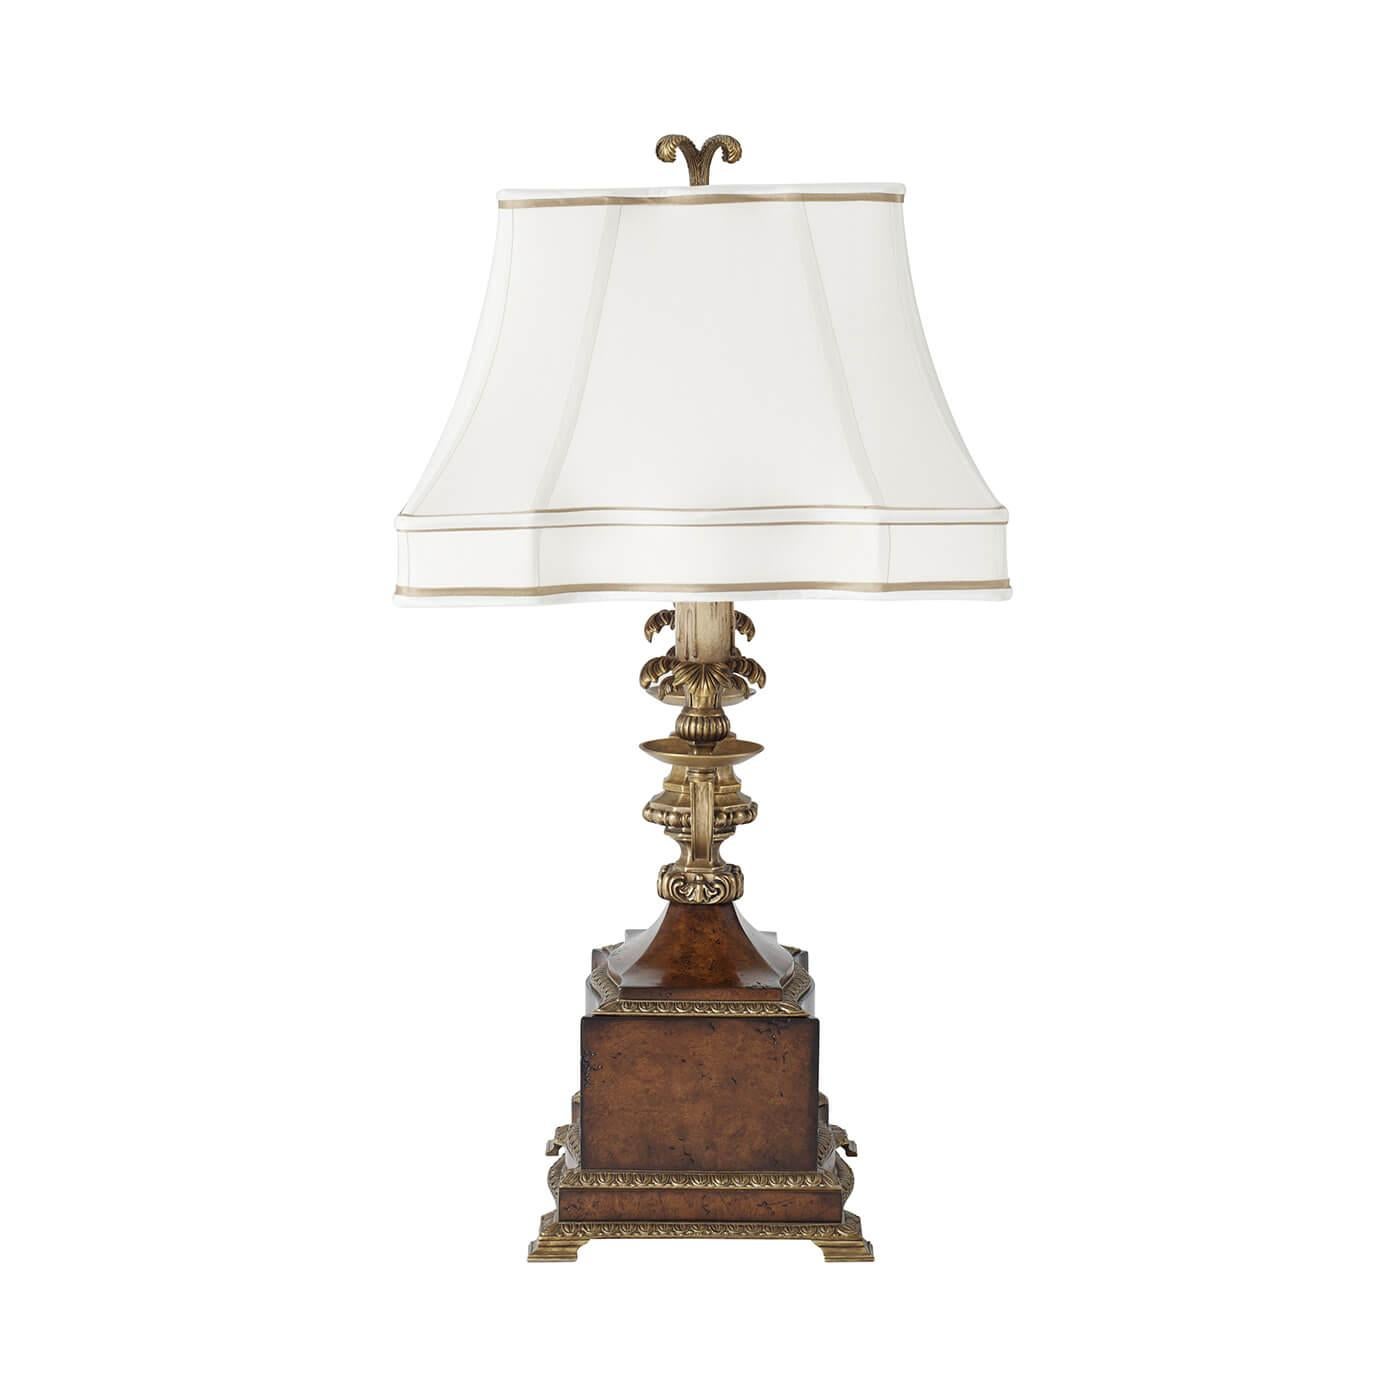 Vietnamese Pair of French Louis XVI Style Table Lamps For Sale